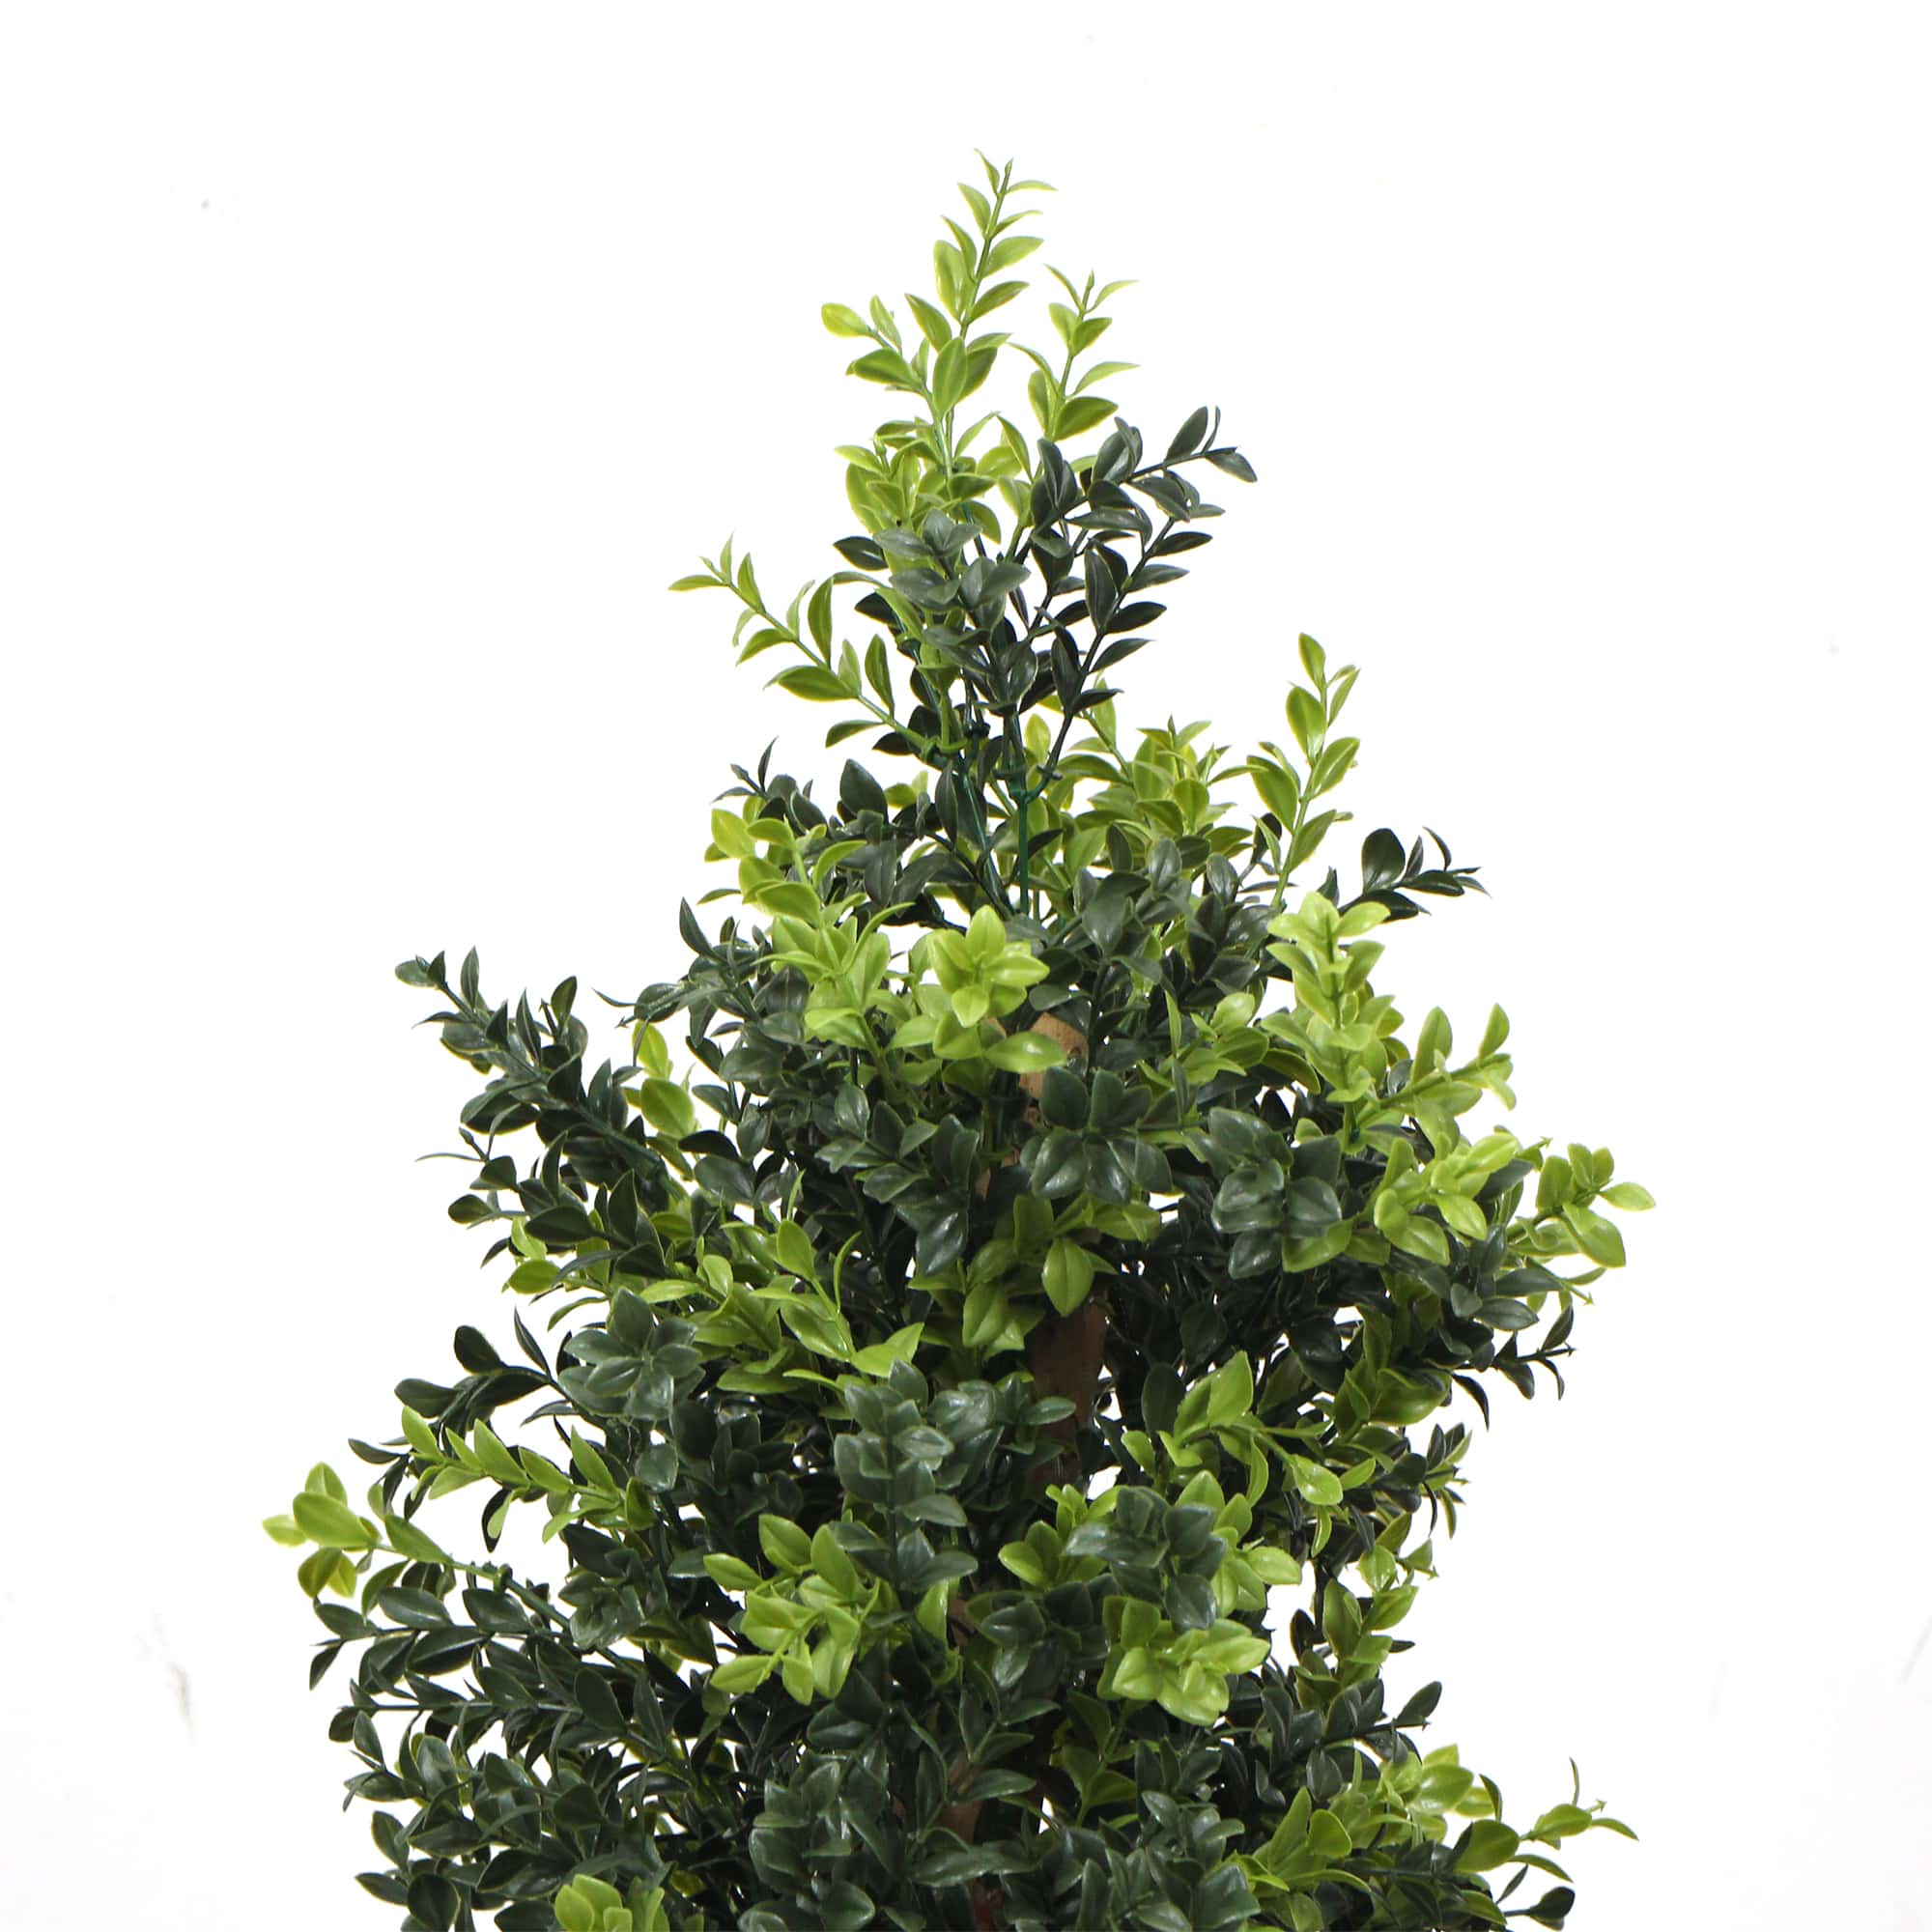 Artificial Potted Topiary Tree 120cm UV Resistant - Designer Vertical Gardens artificial vertical garden melbourne artificial vertical garden plants